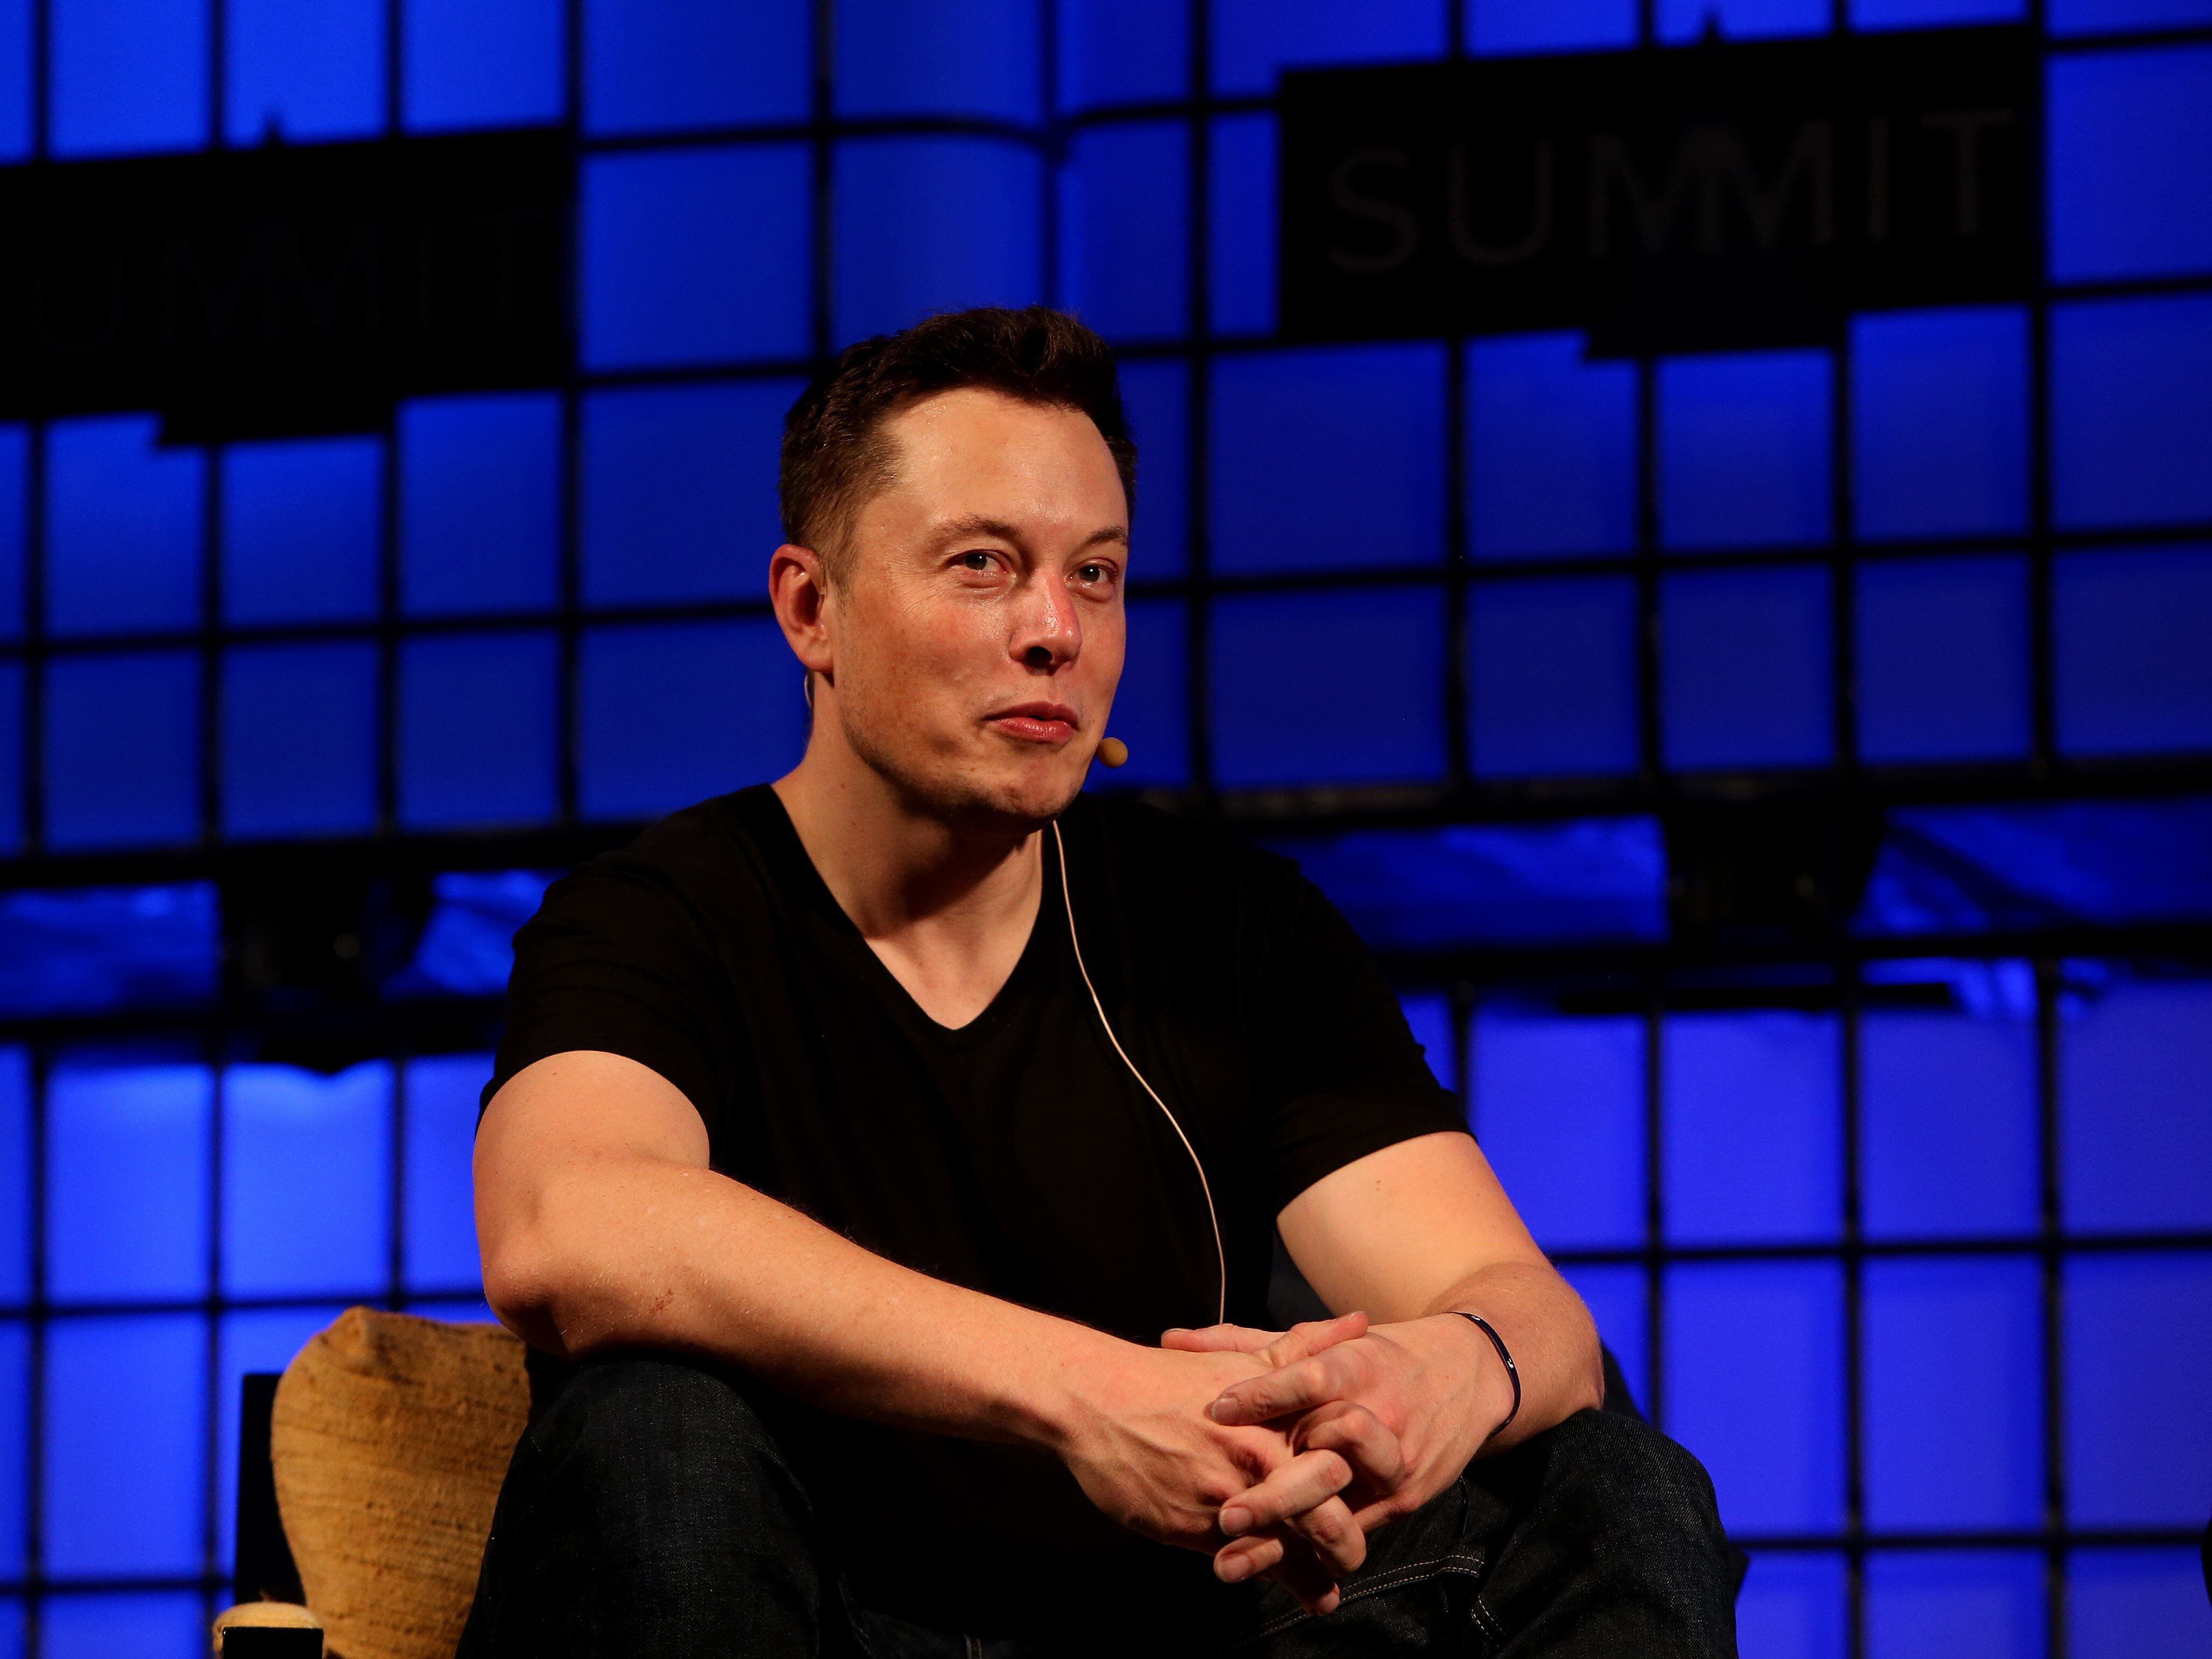 Twitter sues to force Musk to complete his 44 billion dollars acquisition